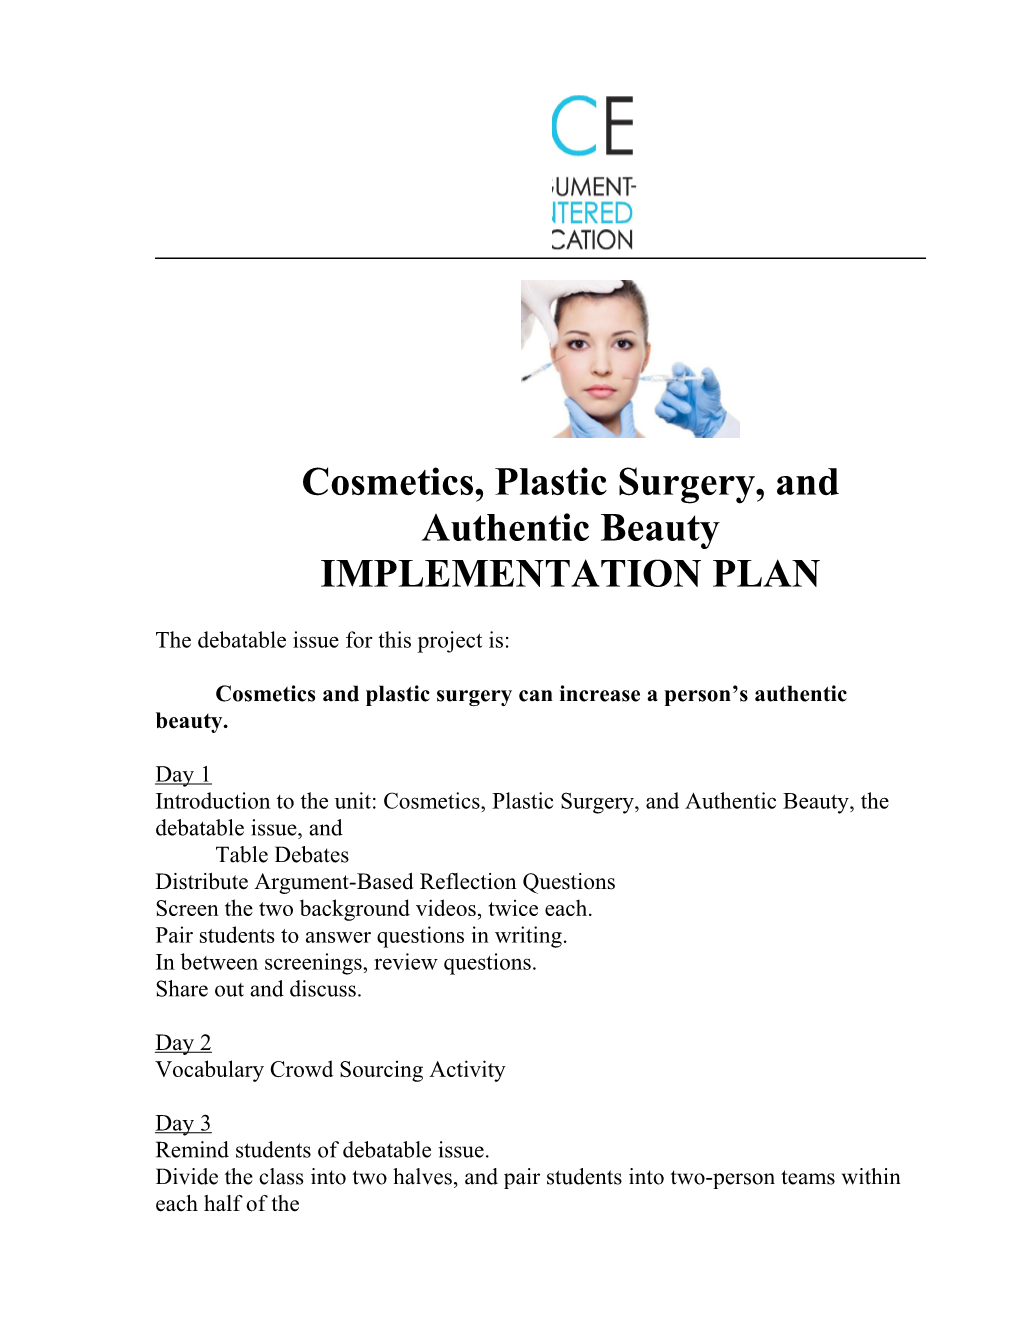 Cosmetics, Plastic Surgery, and Authentic Beauty